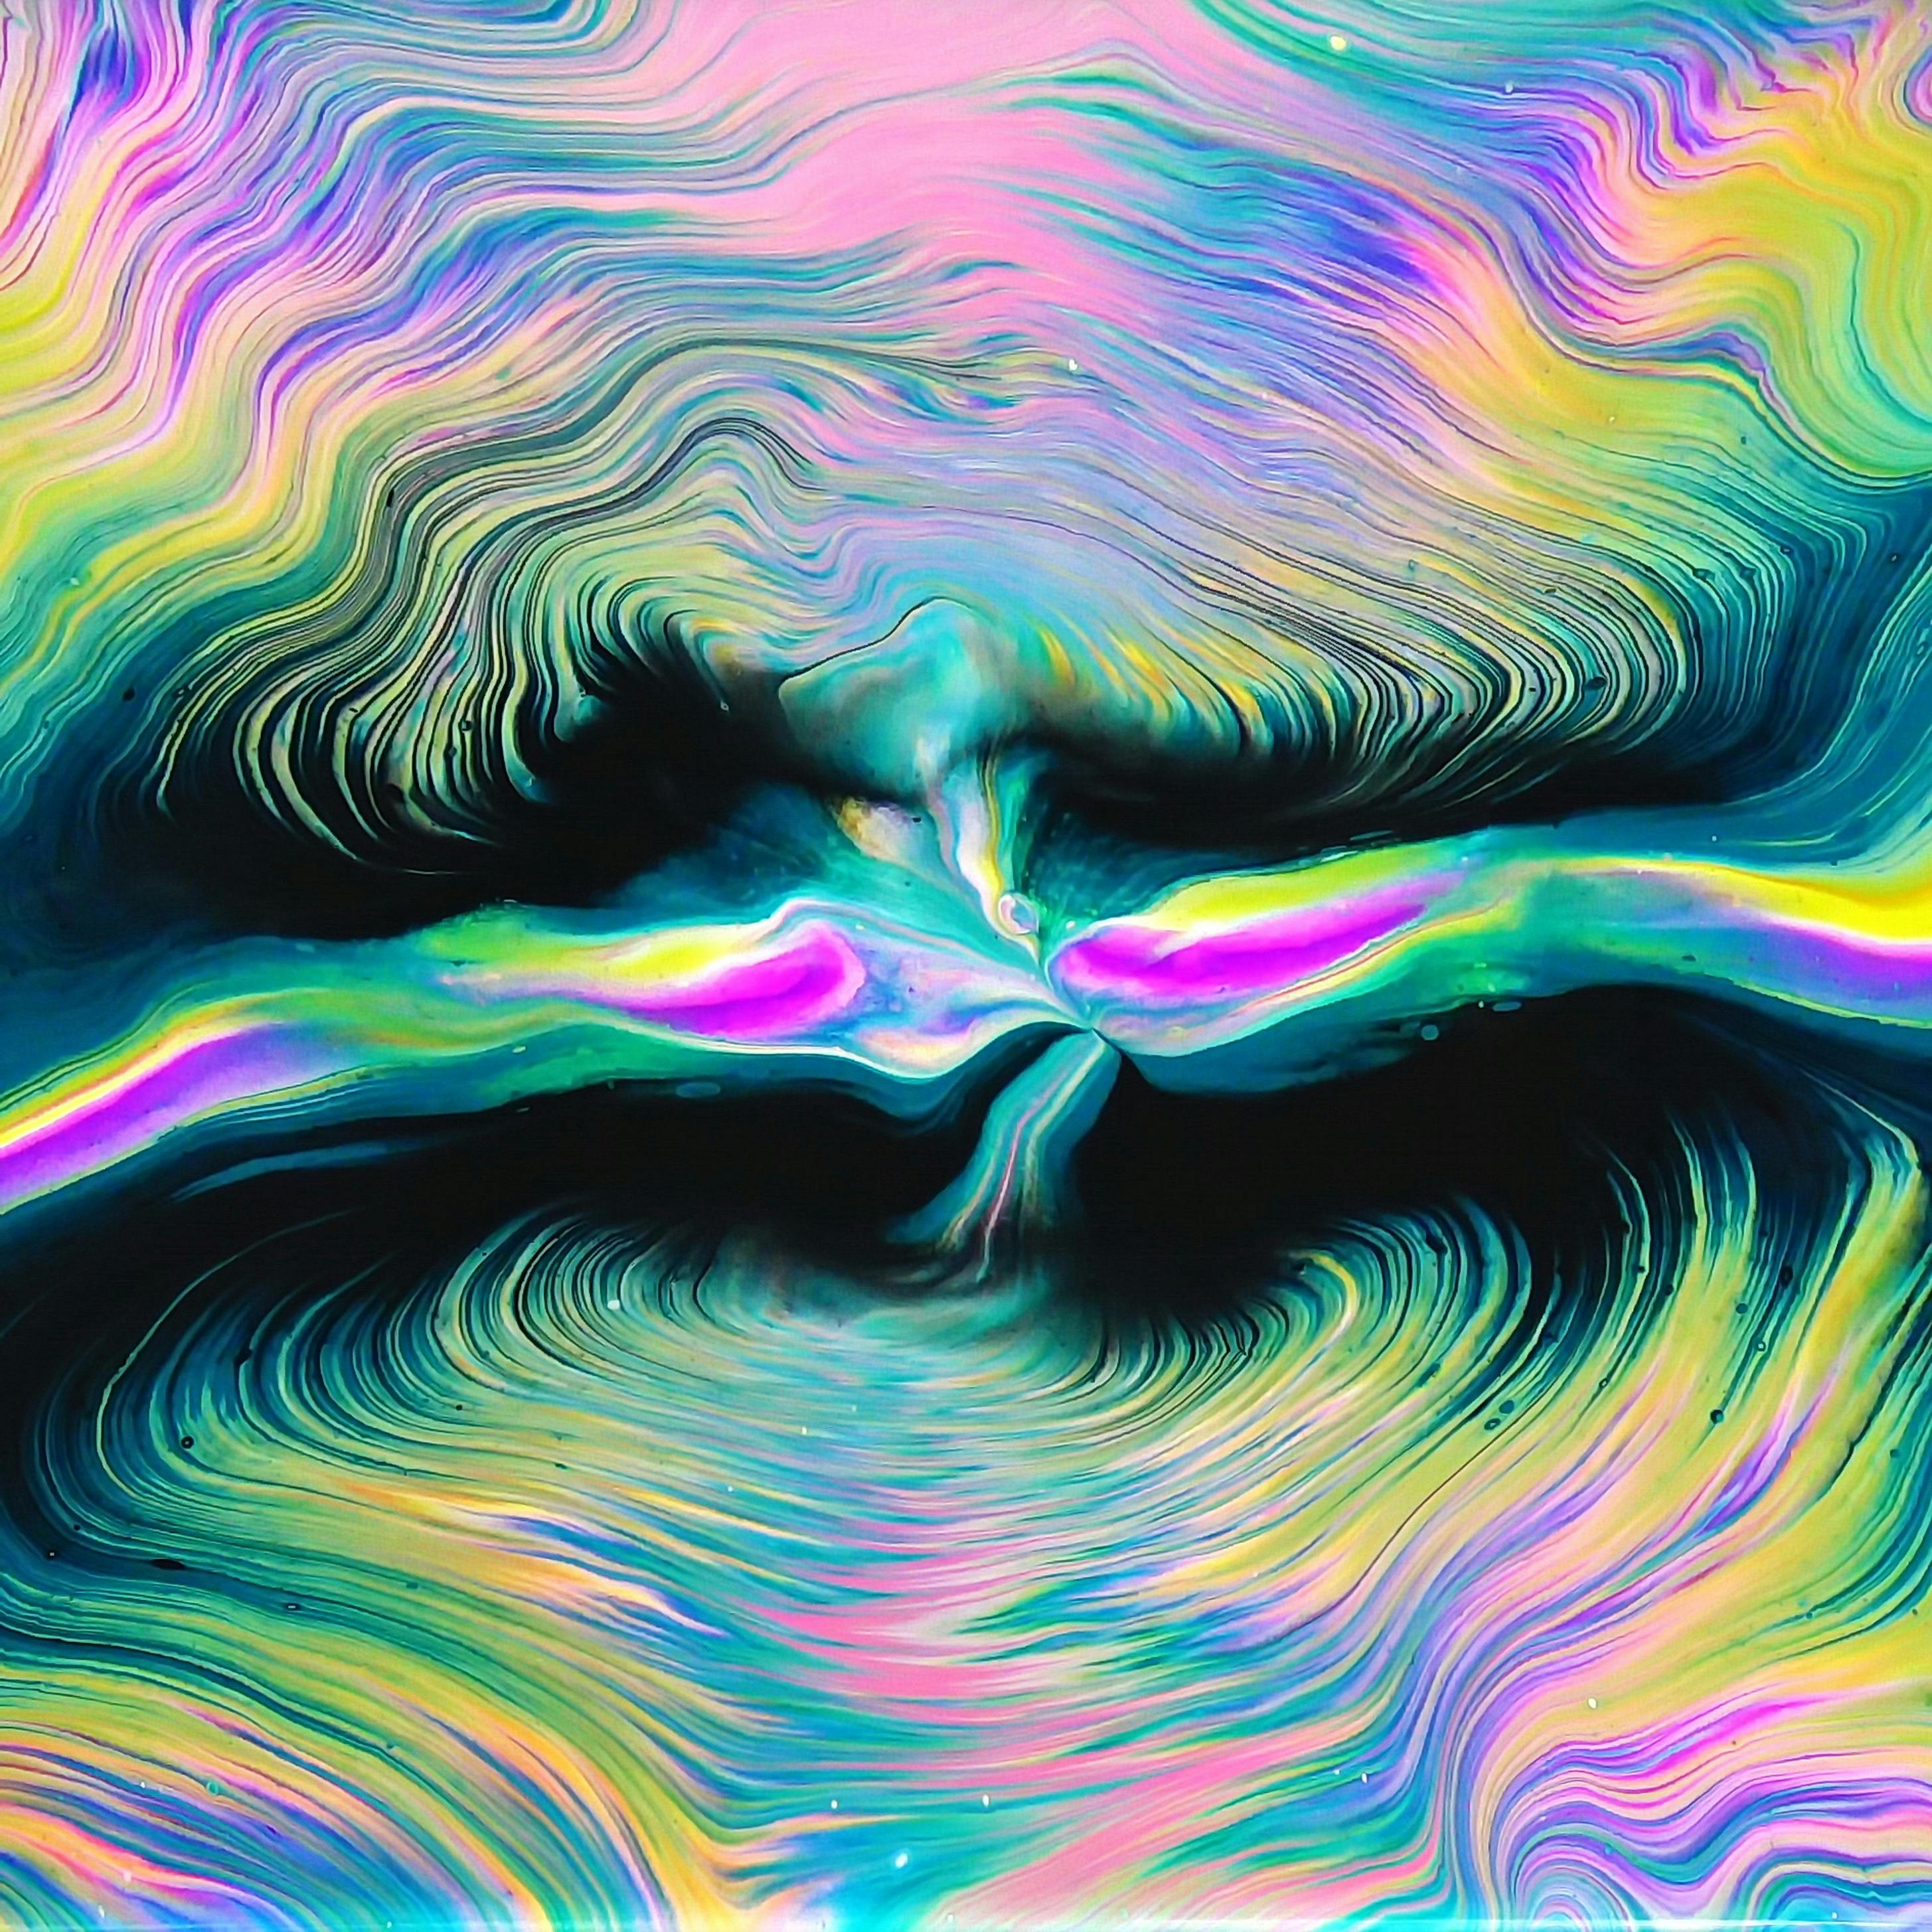 Acidmath Psychedelic Art Wallpapers Android App  YouTube